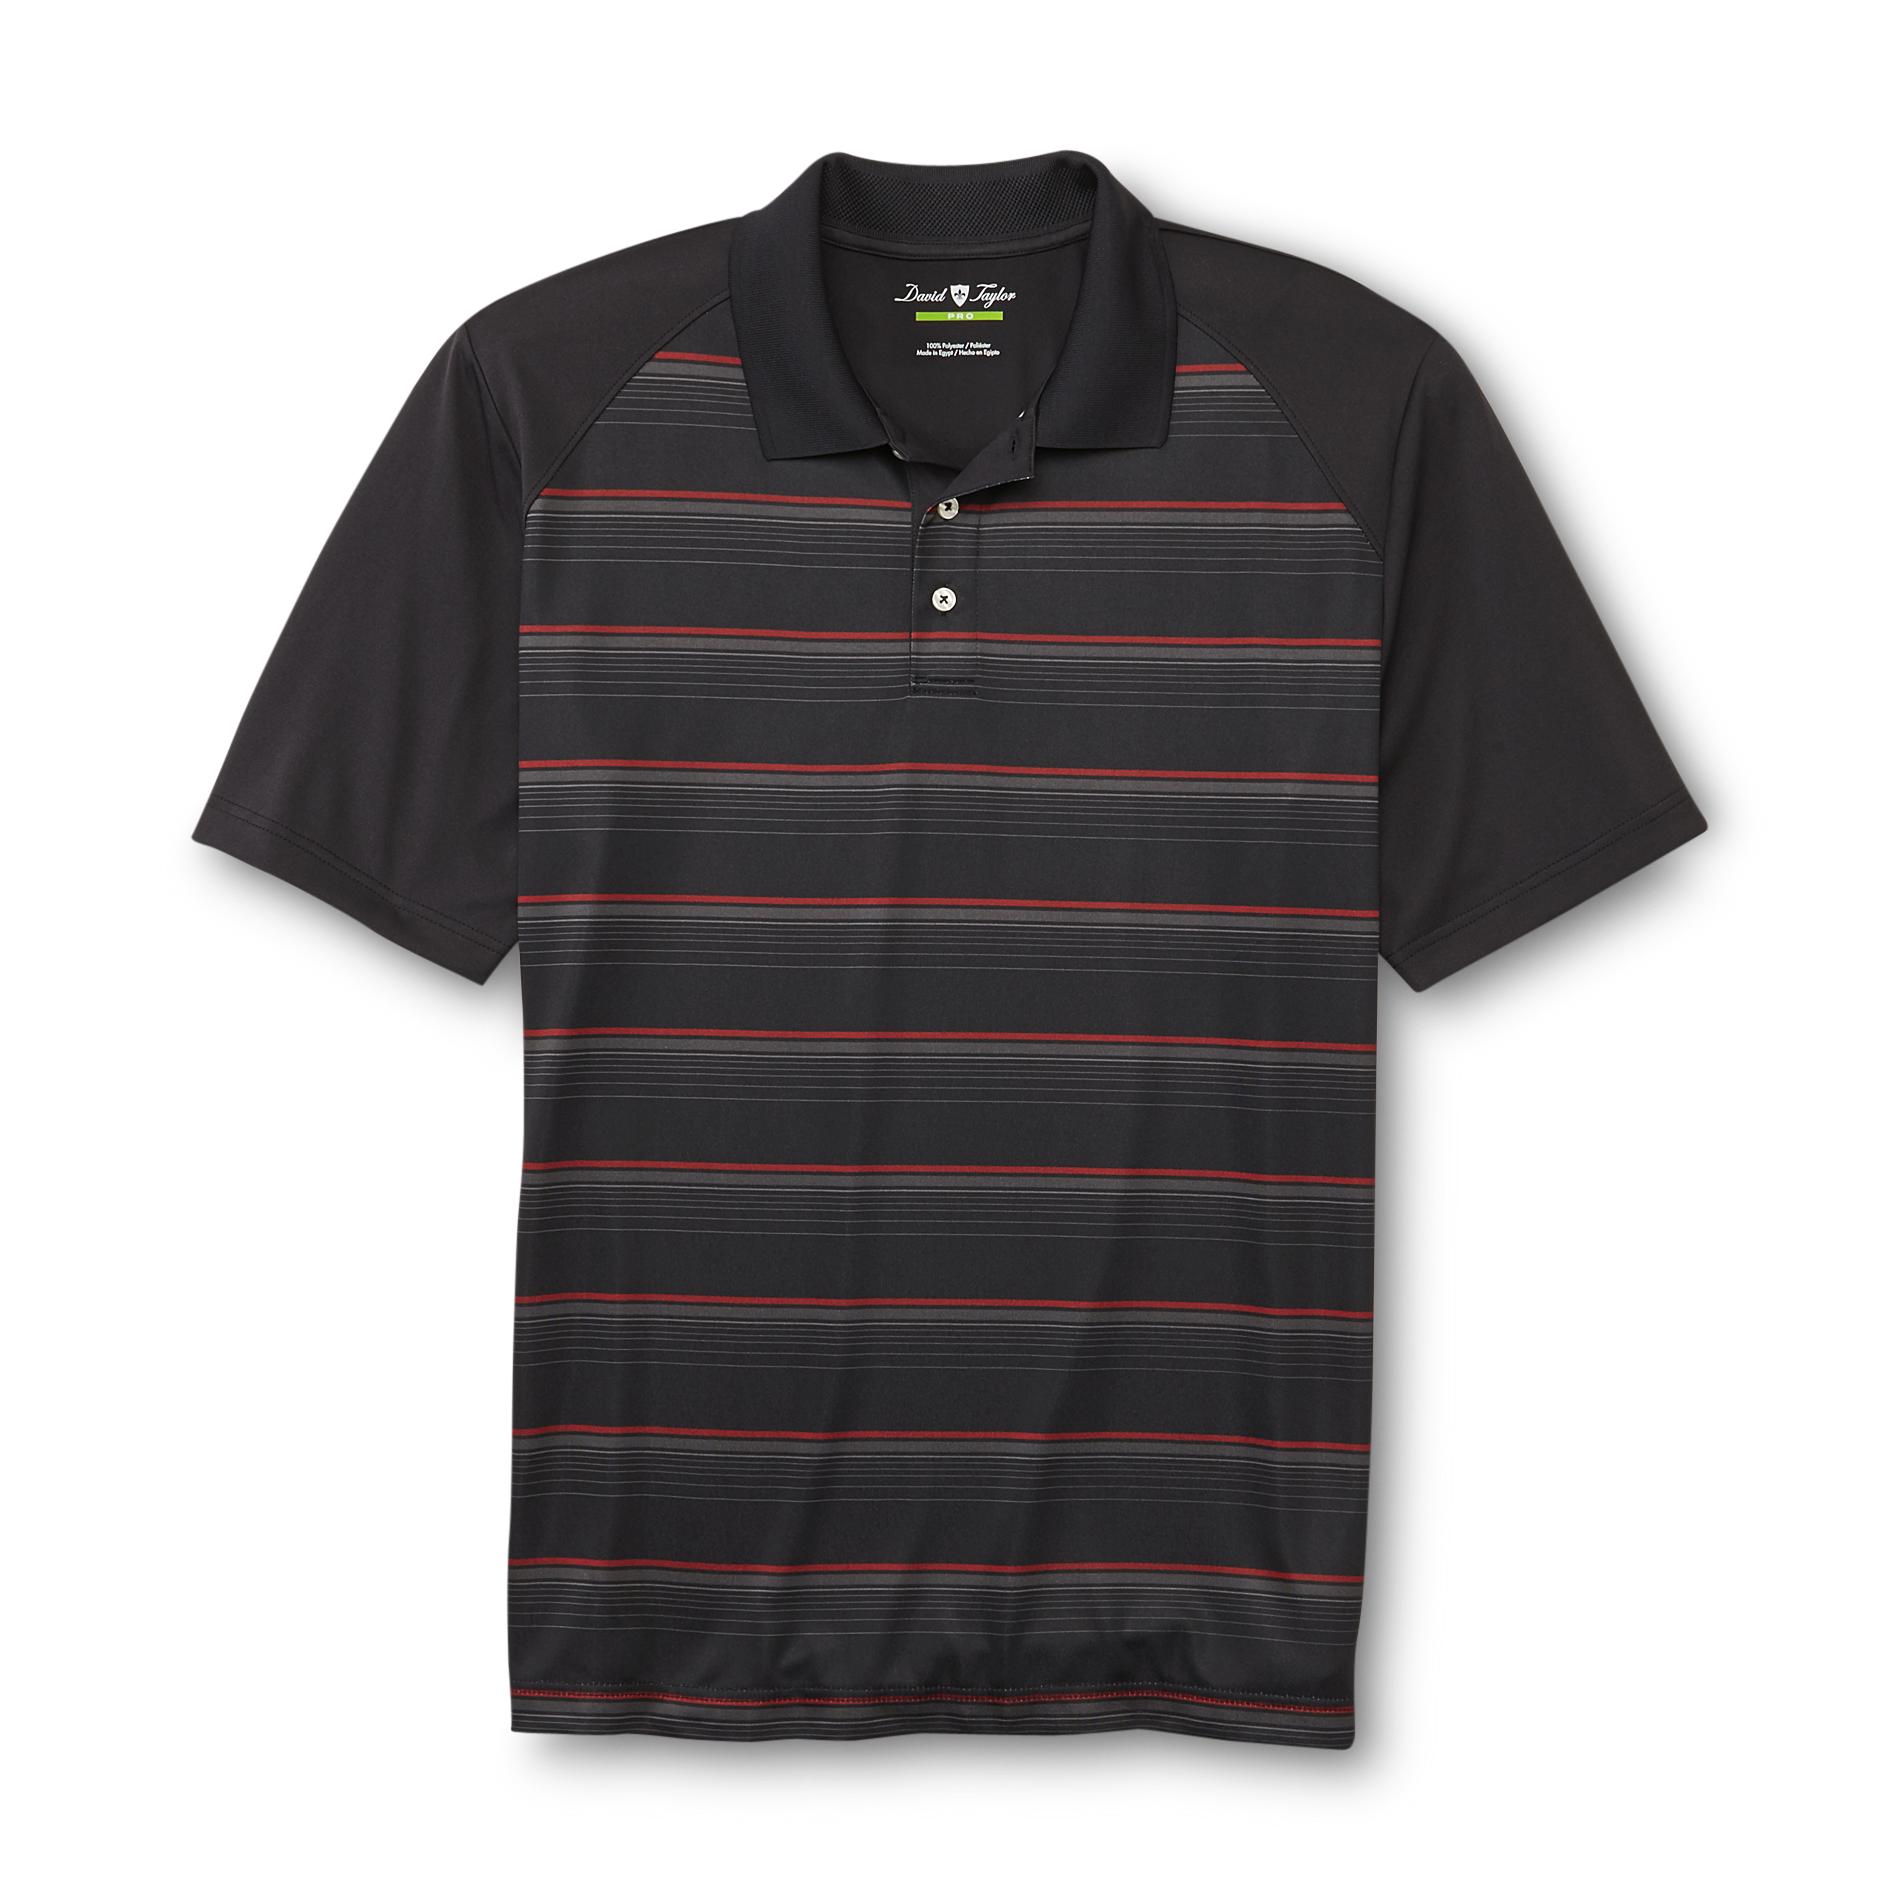 David Taylor Collection Men's Big & Tall Jersey Polo Shirt - Ombre Striped